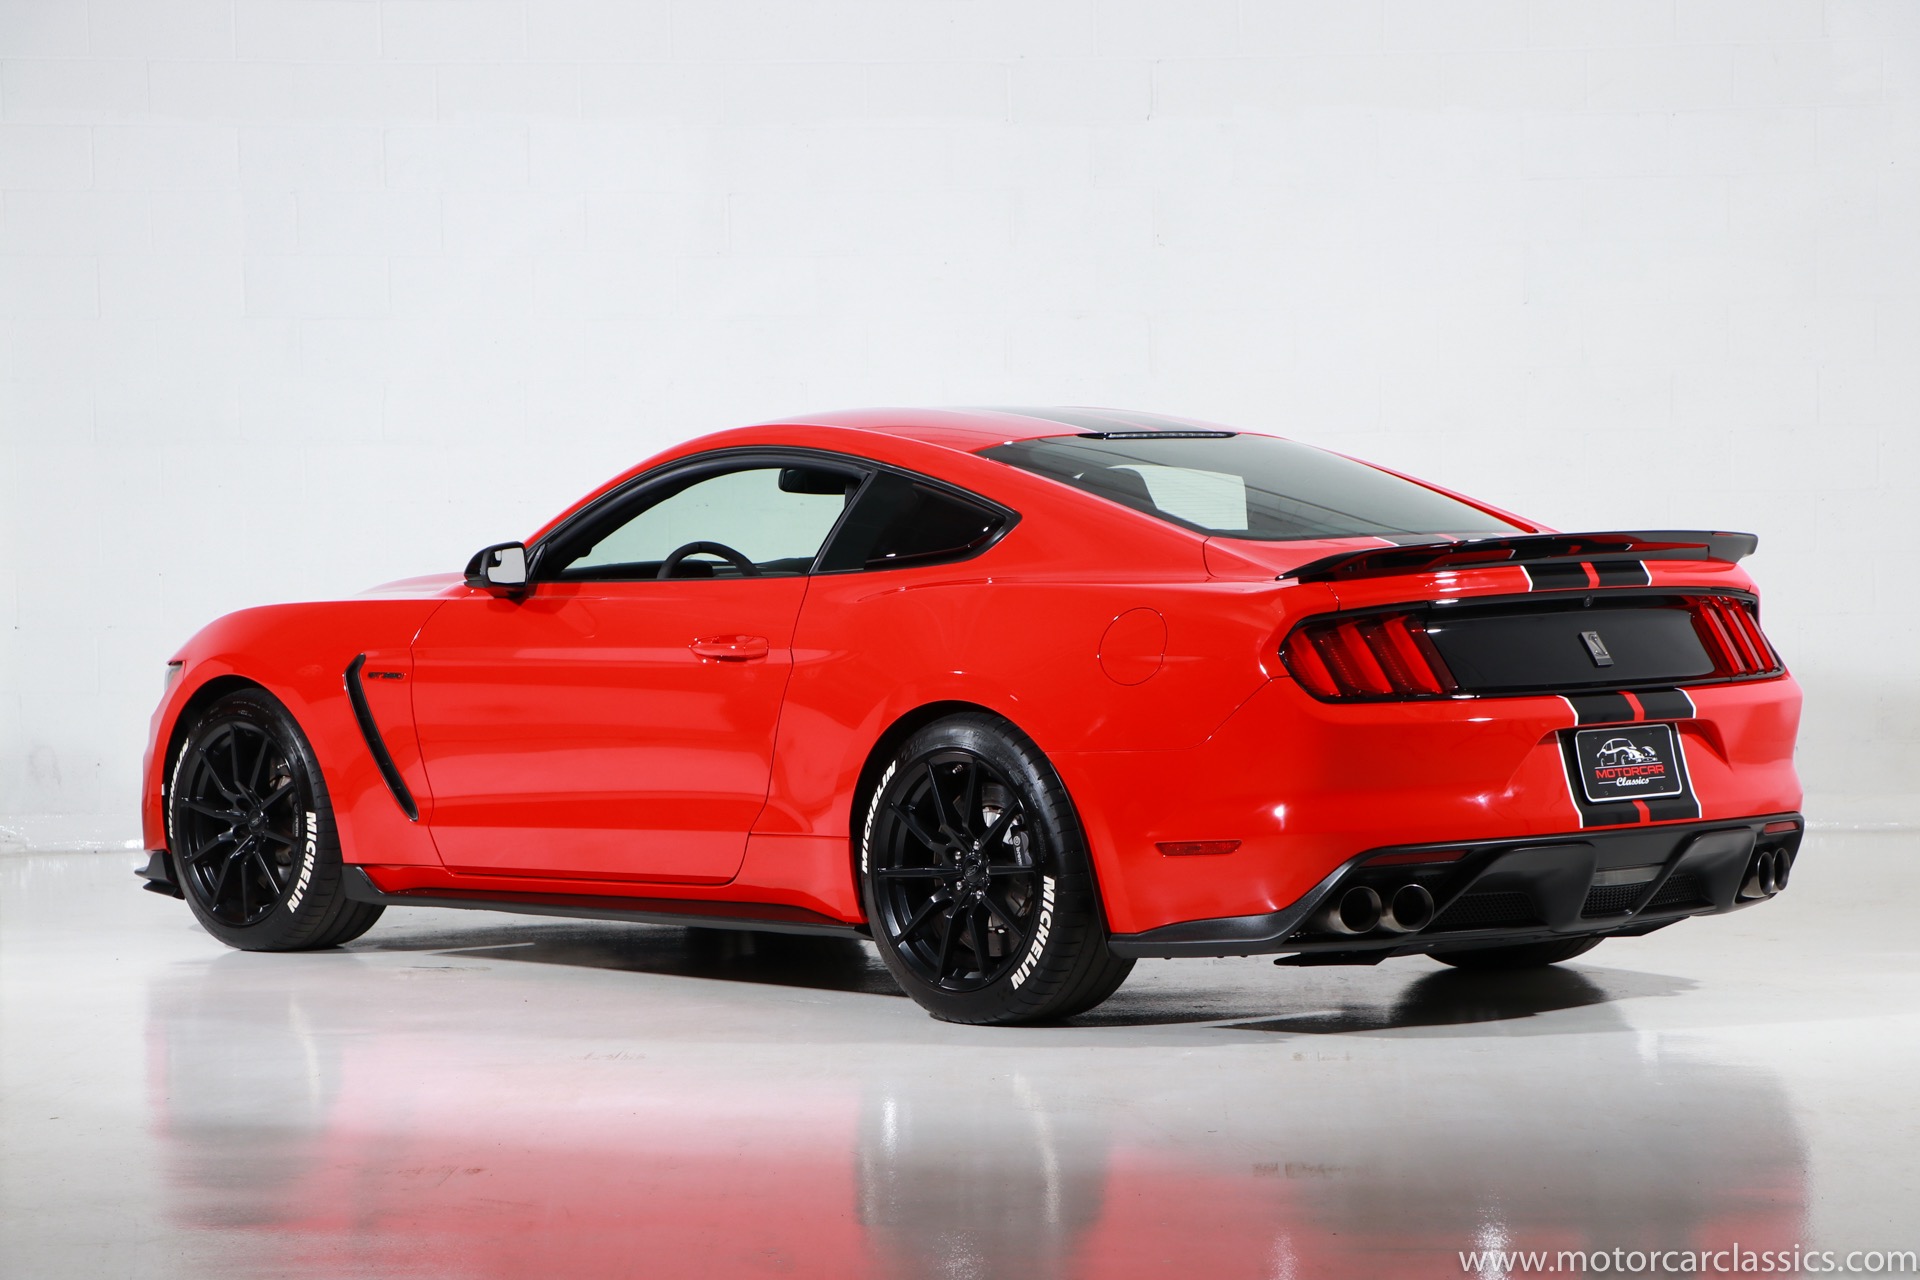 Used 2016 Ford Mustang Shelby GT350 For Sale ($56,900) | Motorcar ...